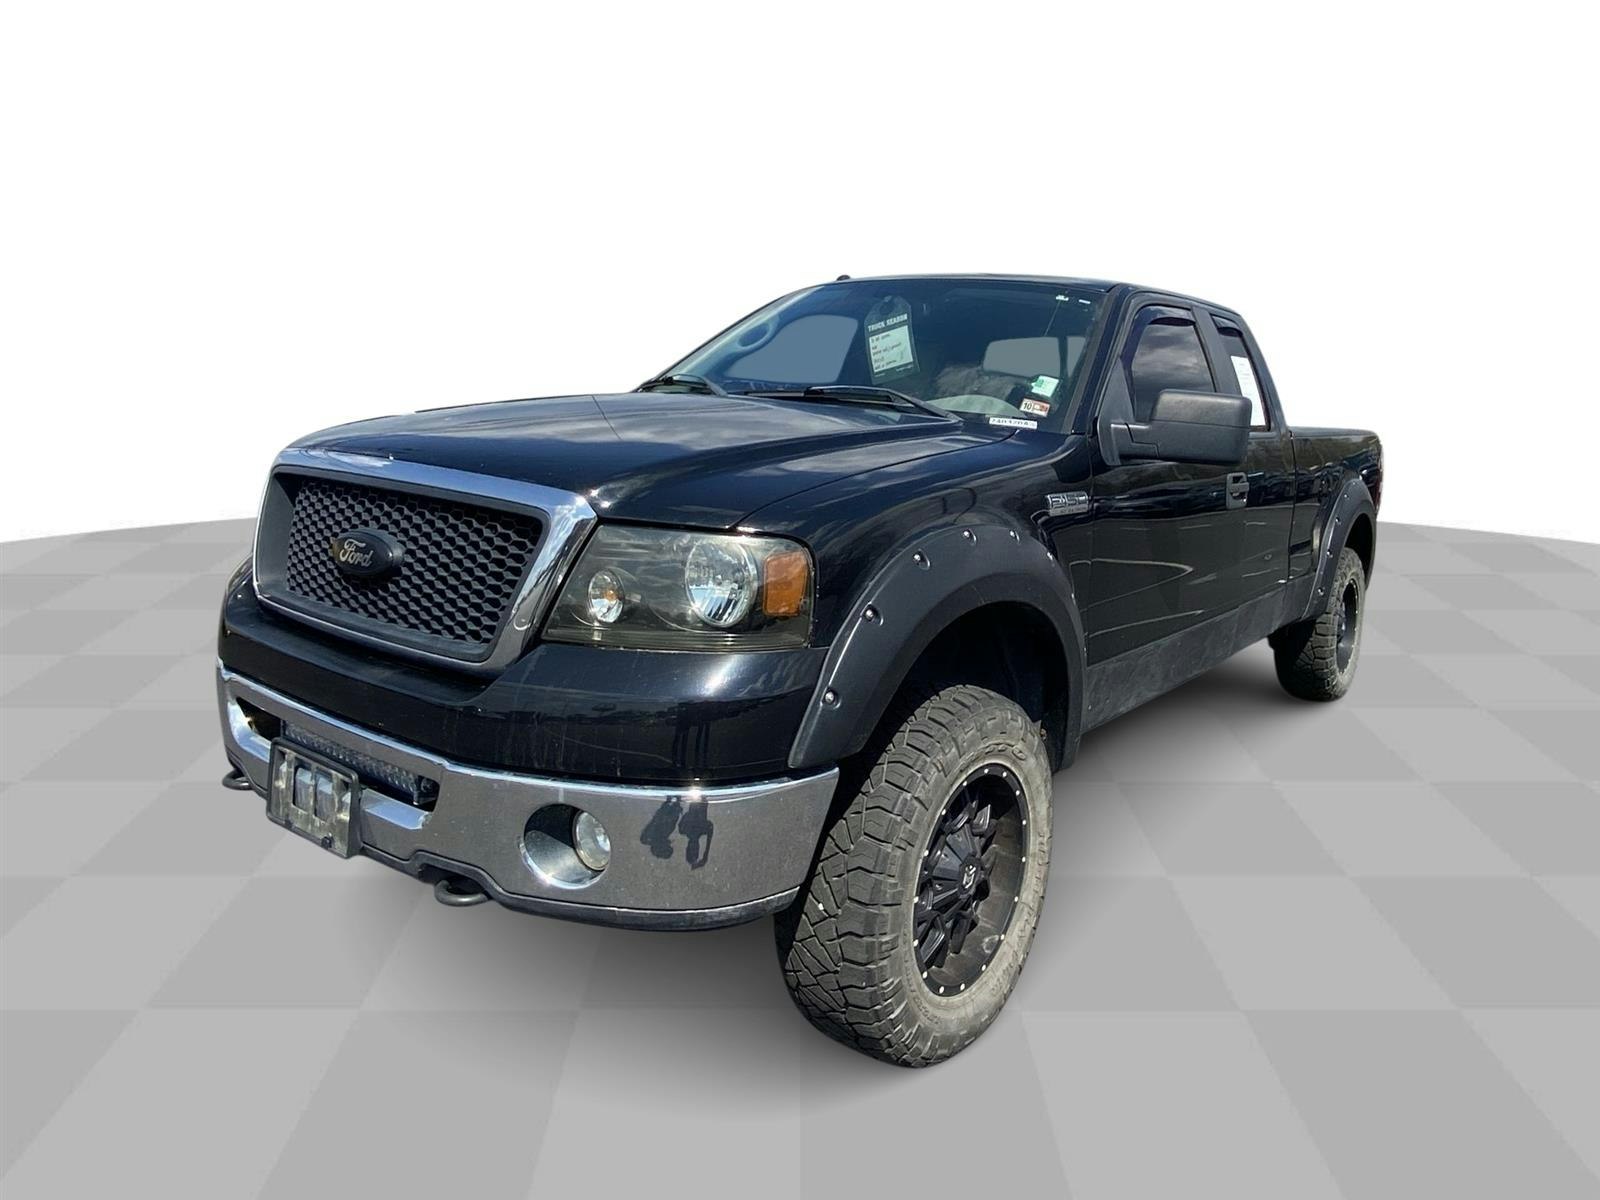 2008 Ford F150 (240320A) Main Image